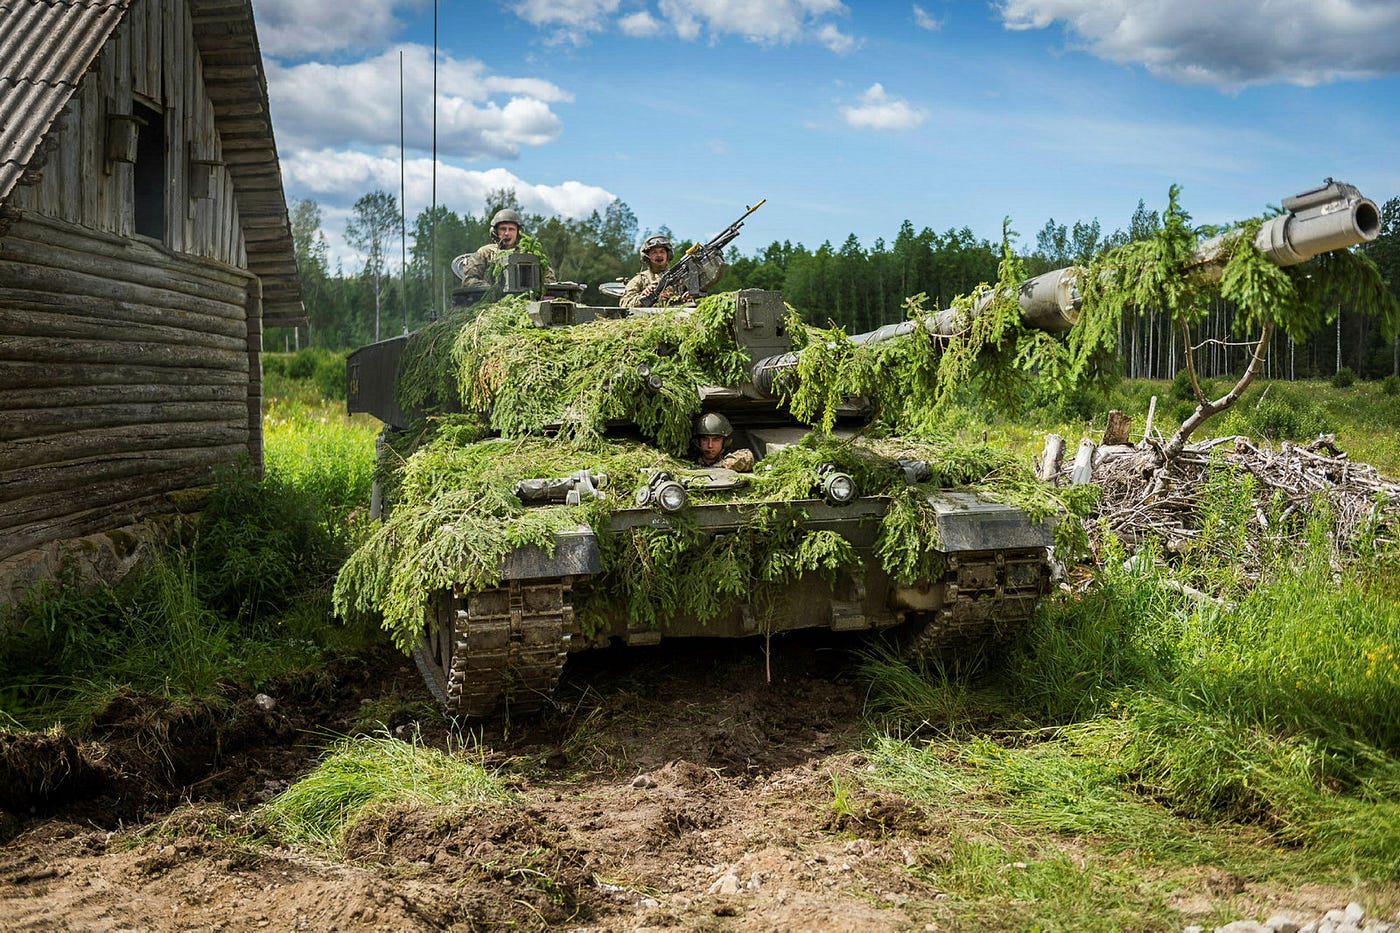 UK-supplied Challenger 2 tank destroyed in Ukraine, a first from Russian  fire